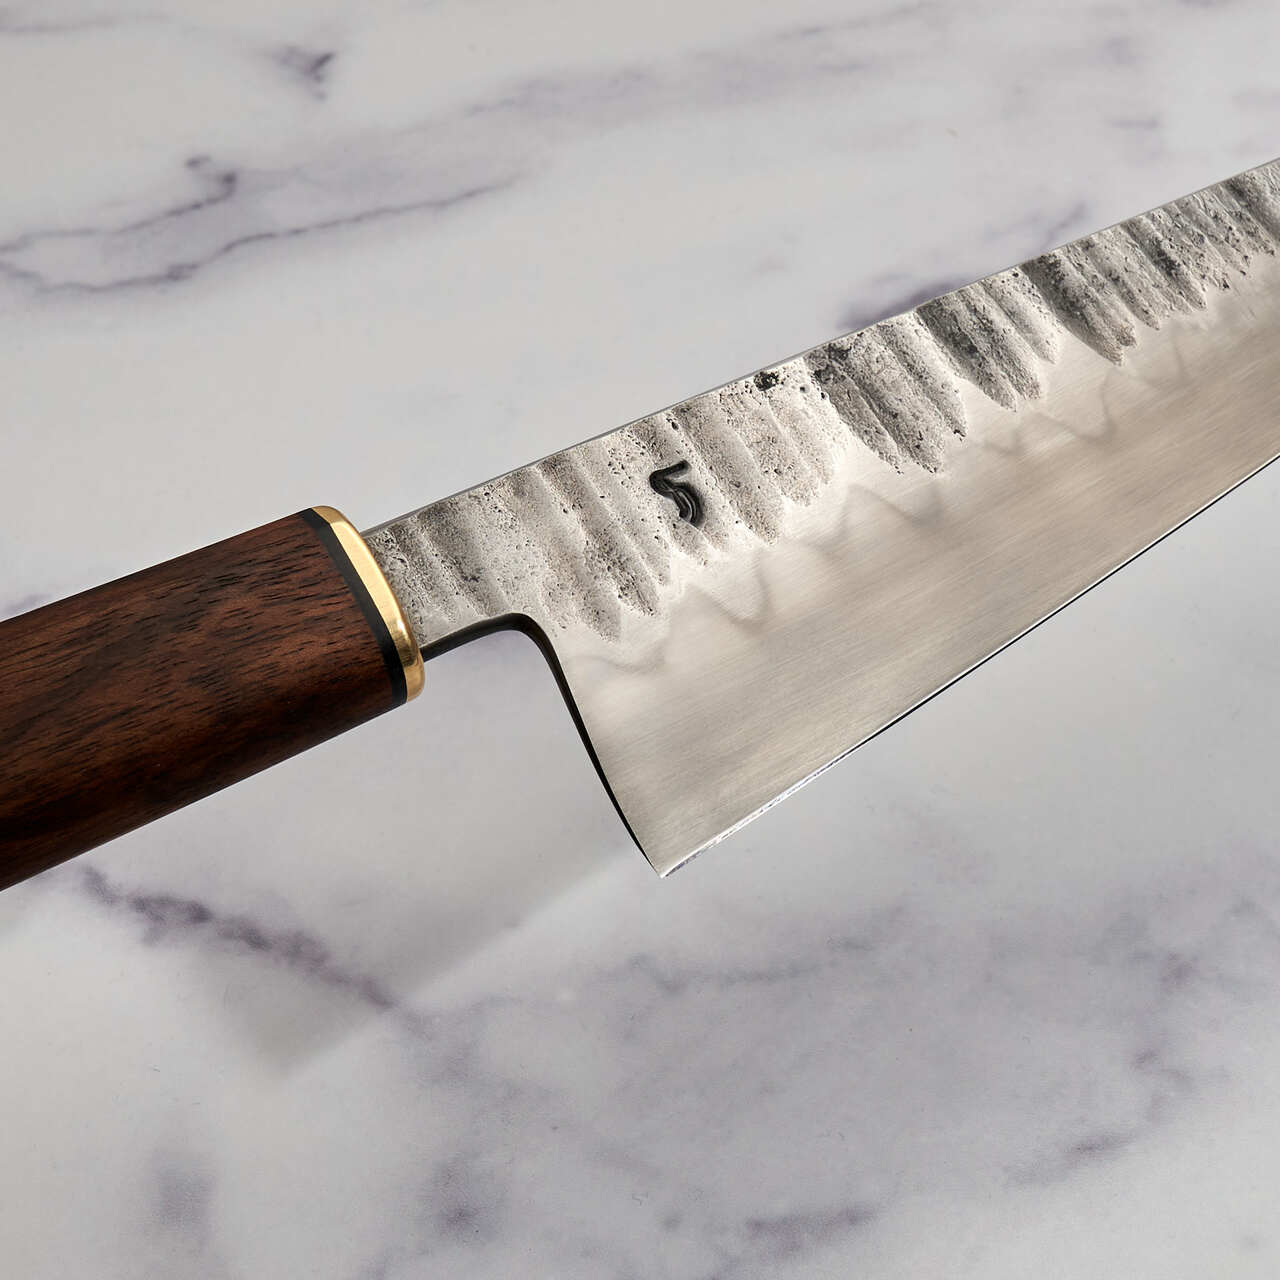 MCX K-Tip Gyuto 230mm 26c3 Limited Release by Fredrik Spåre - 2nd Edition - Texture